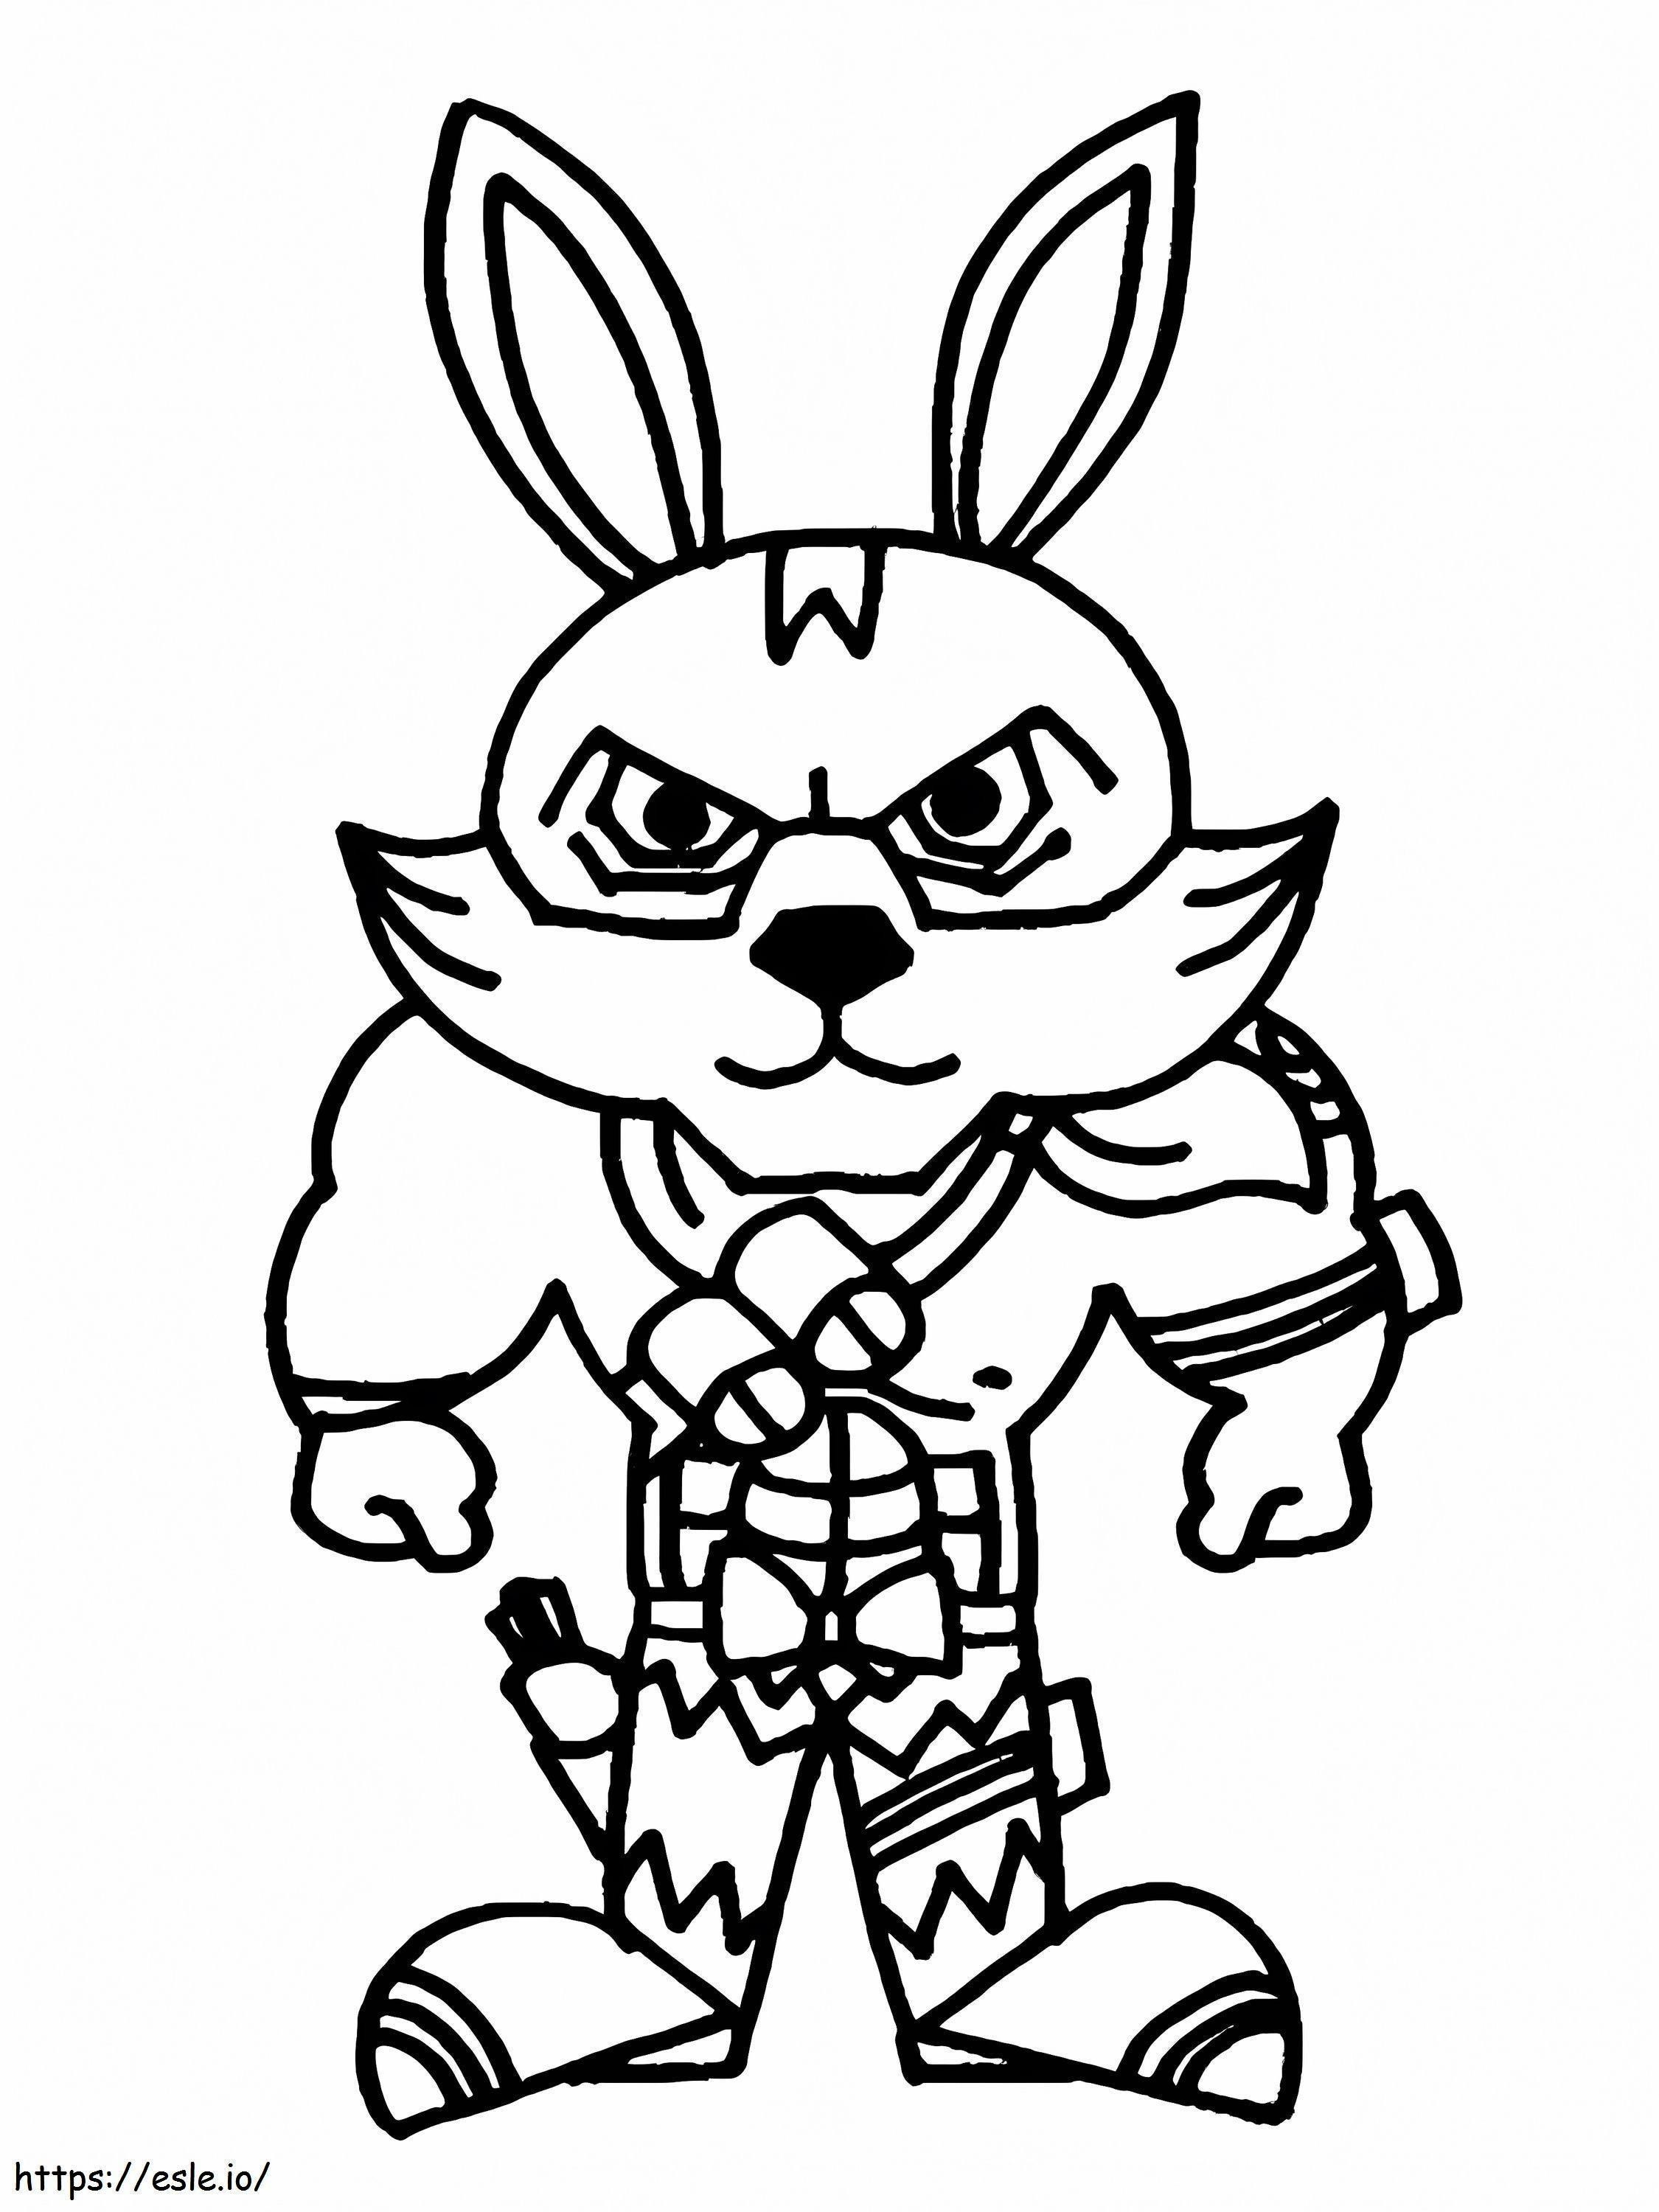 Bunny Warrior Free Fire coloring page